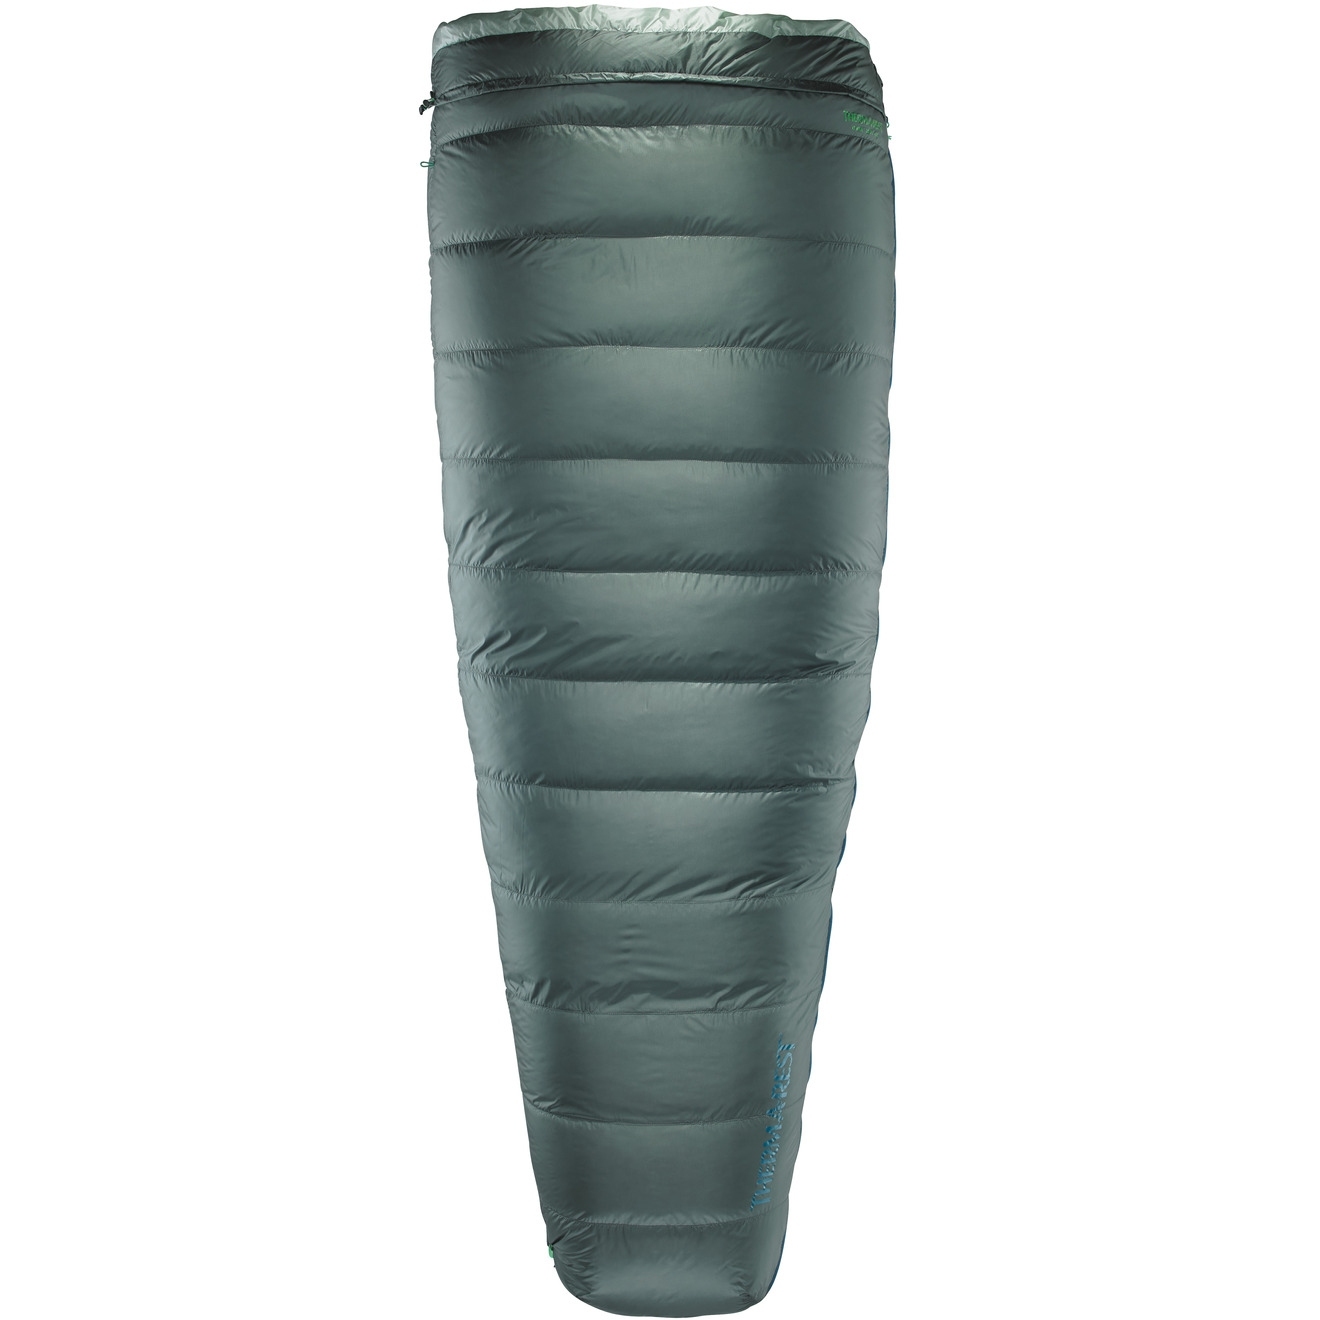 Picture of Therm-a-Rest Ohm 20F/-6C Regular Sleeping Bag - Balsam